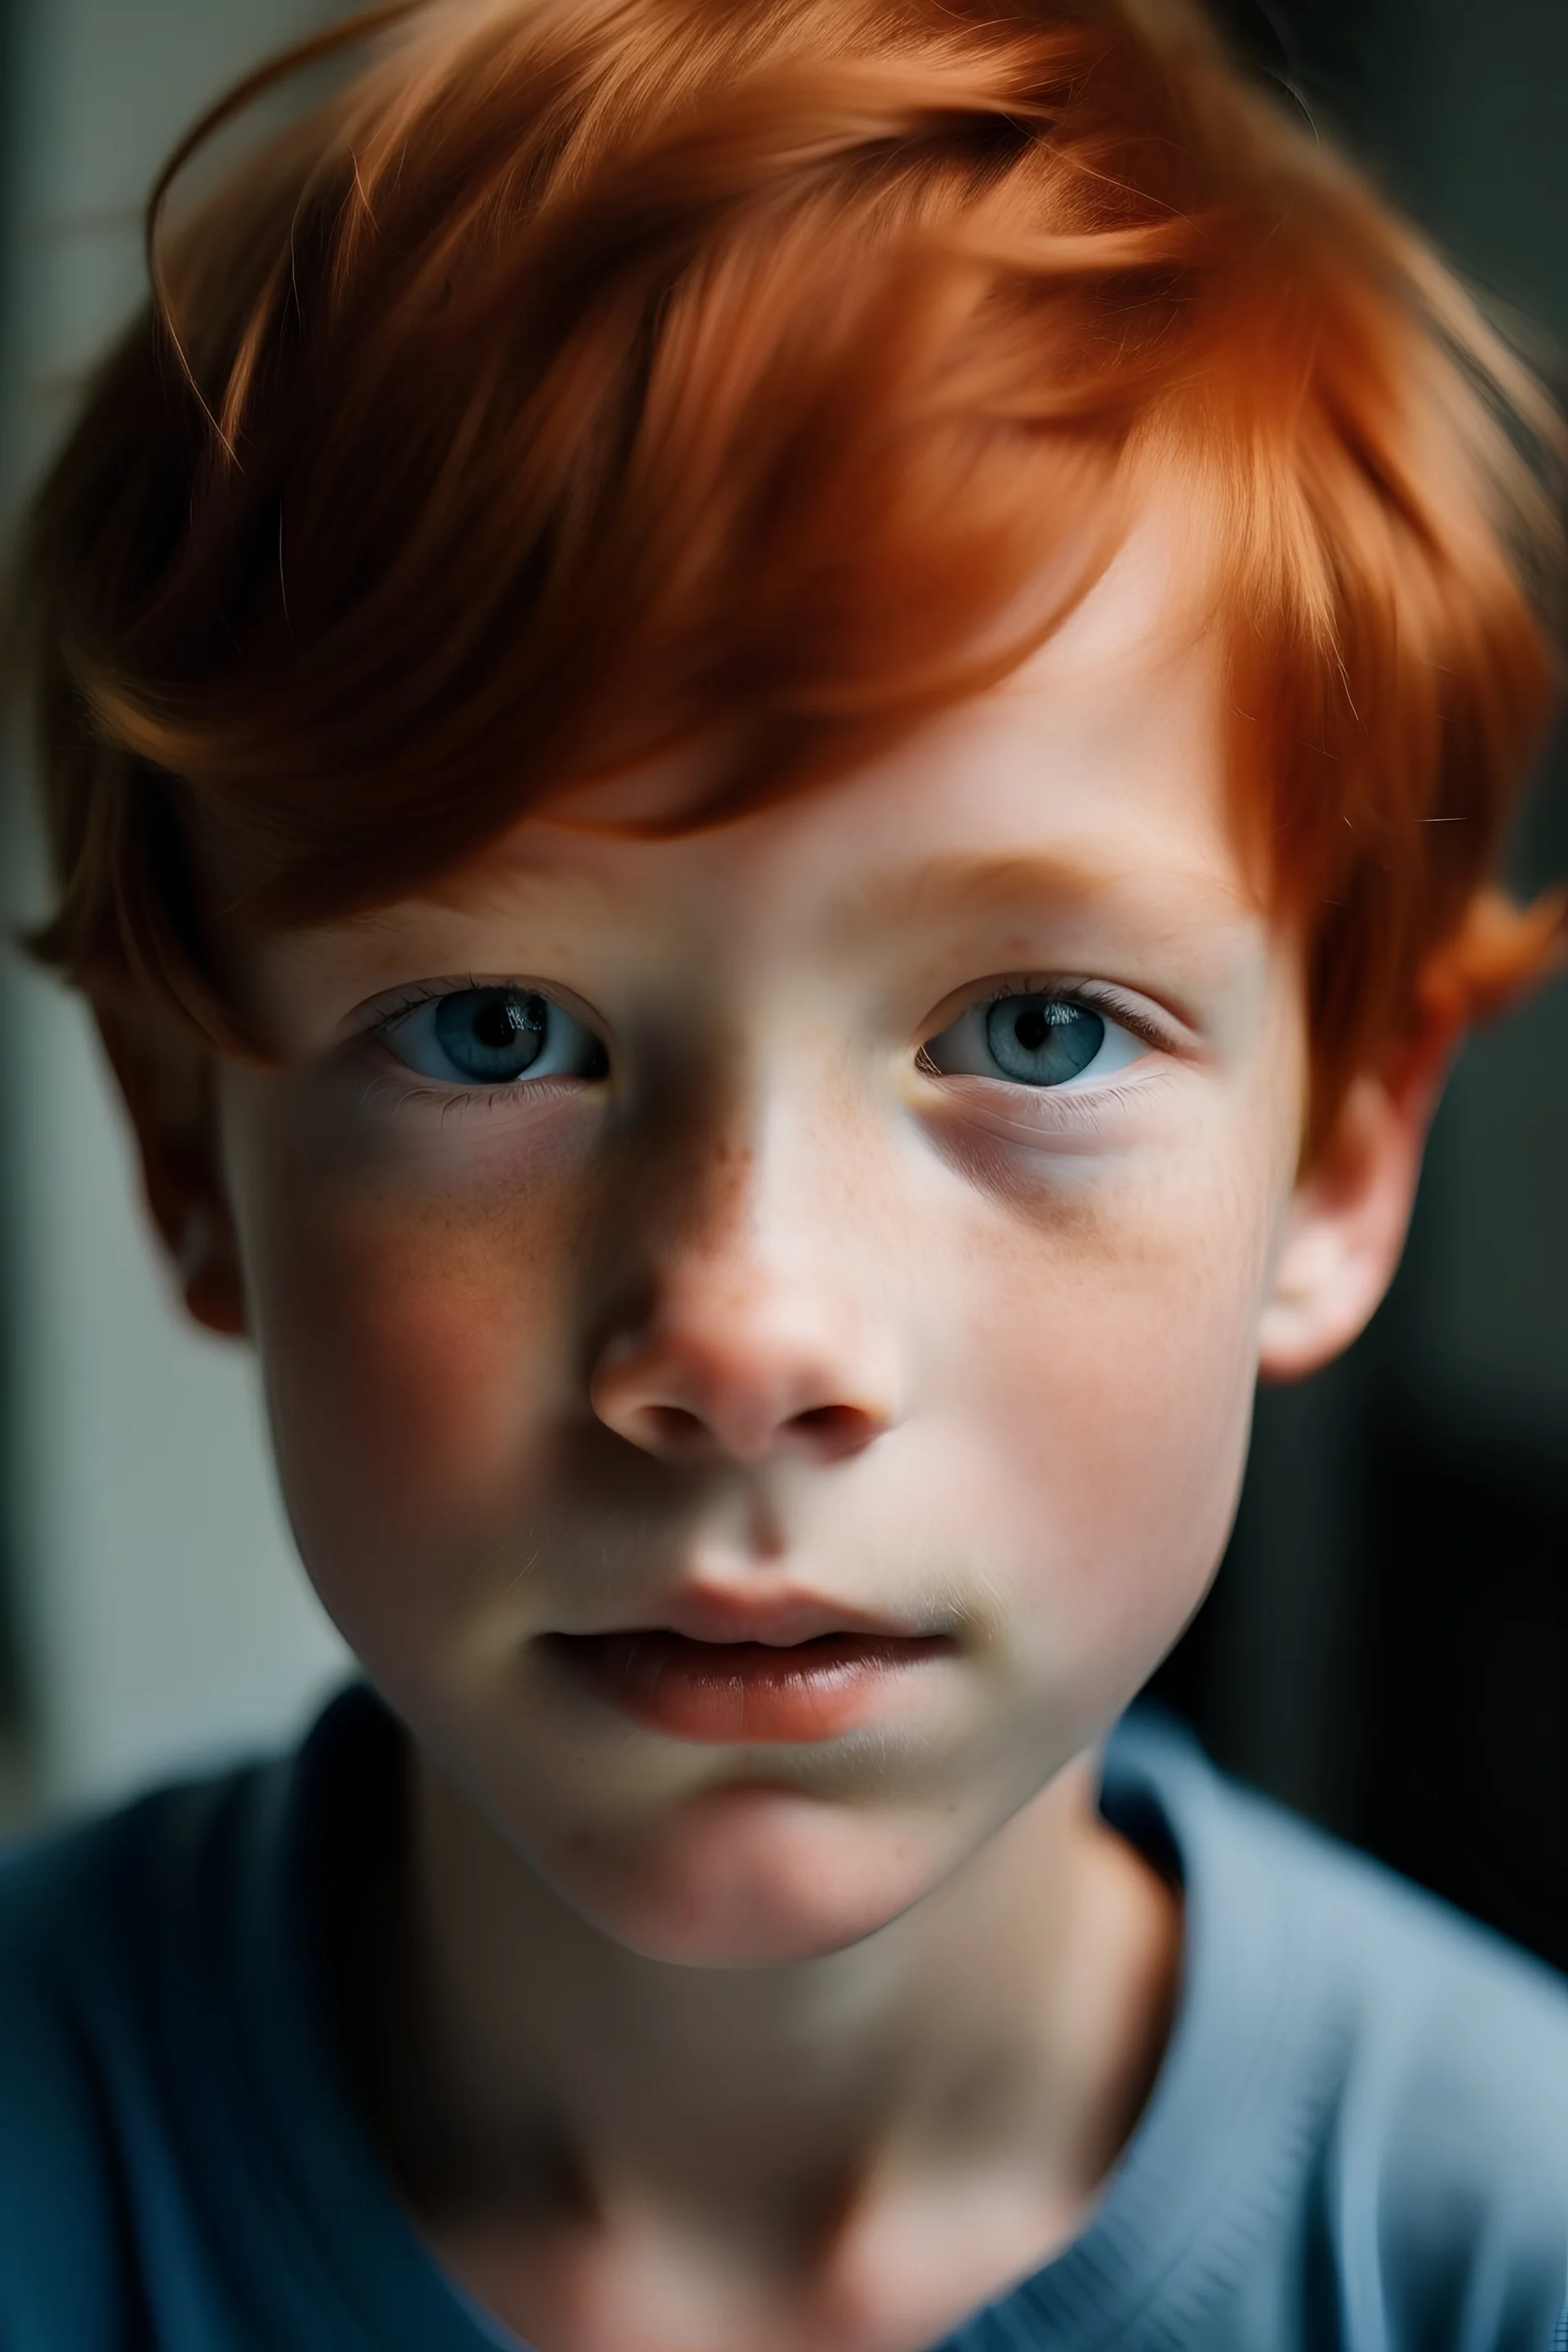 Manho is a boy with short red hair, blue eyes, and freckles